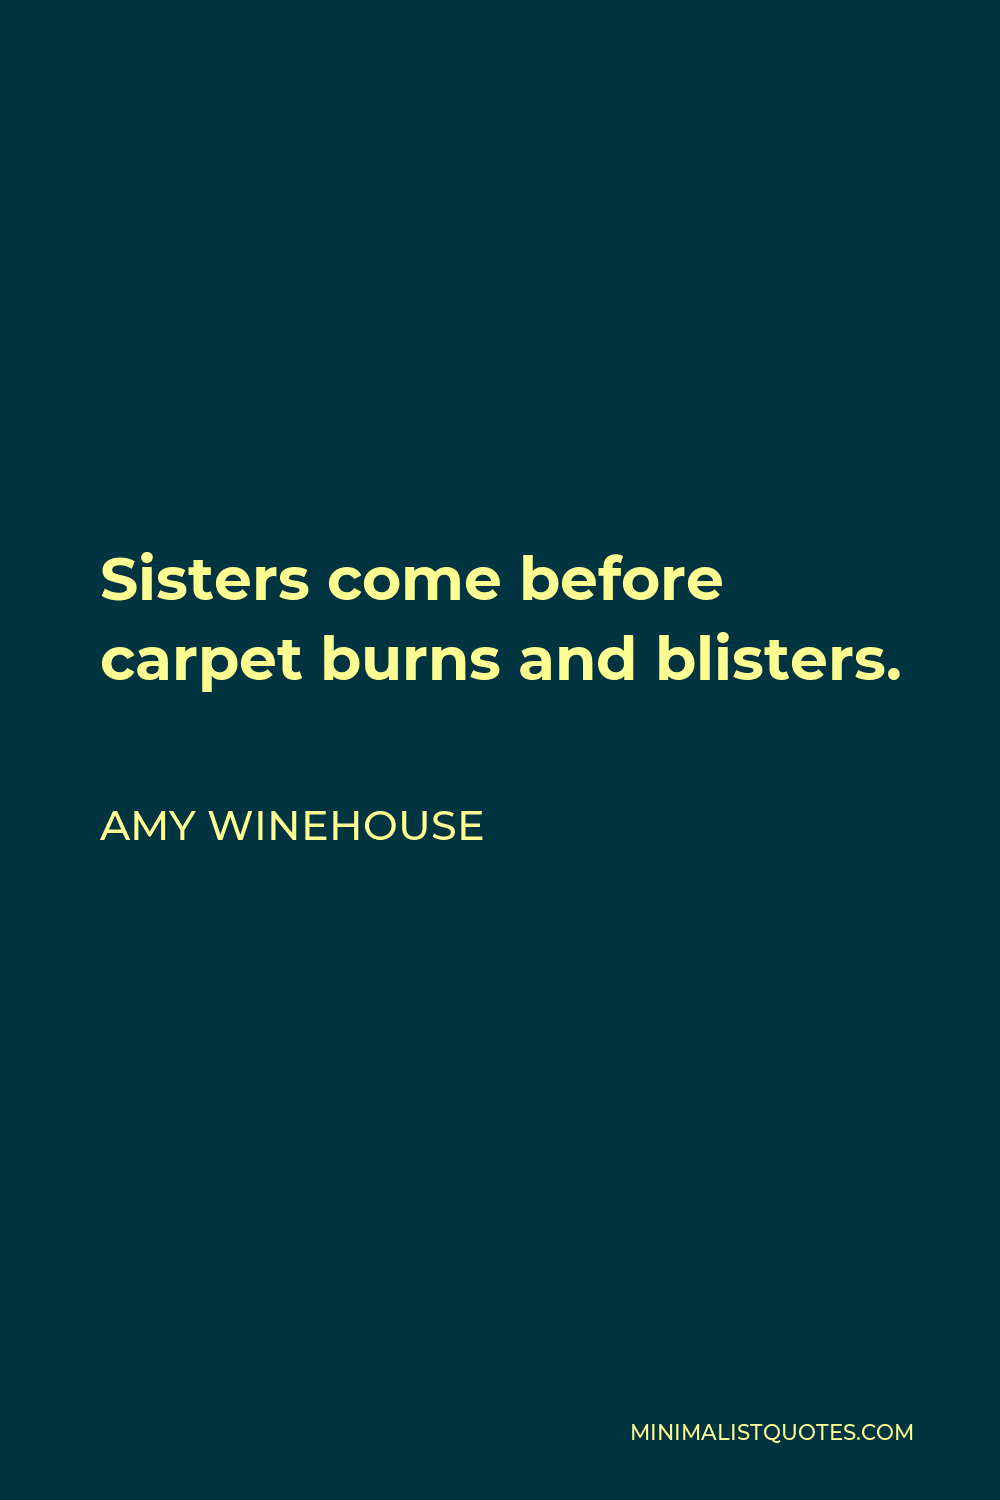 Amy Winehouse Quote - Sisters come before carpet burns and blisters.